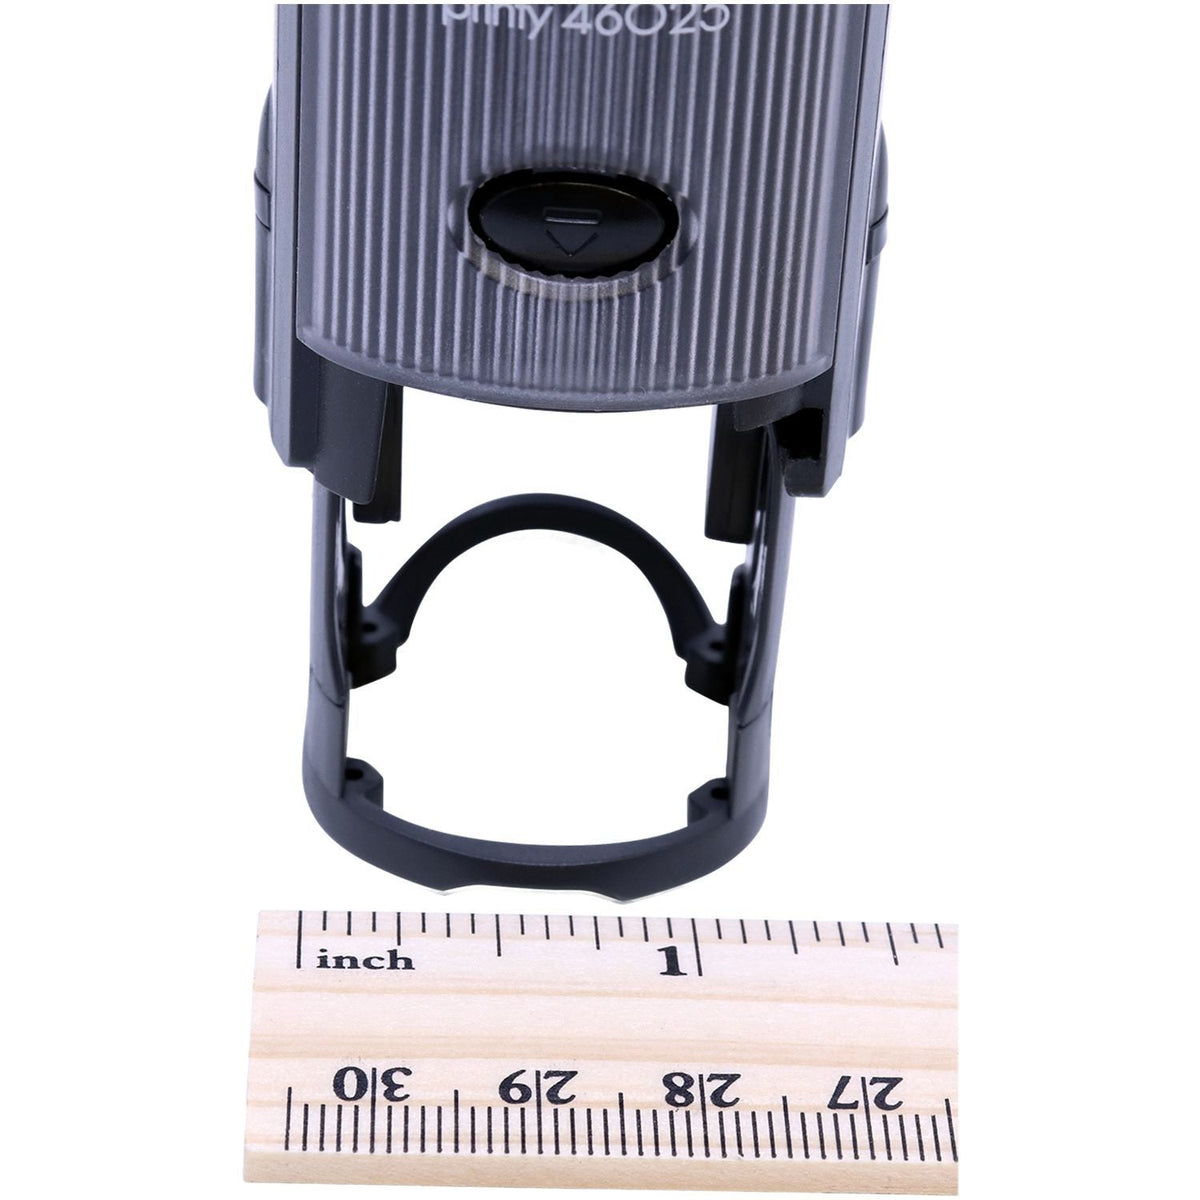 Measurment of Self-Inking Round File Copy Stamp with Ruler